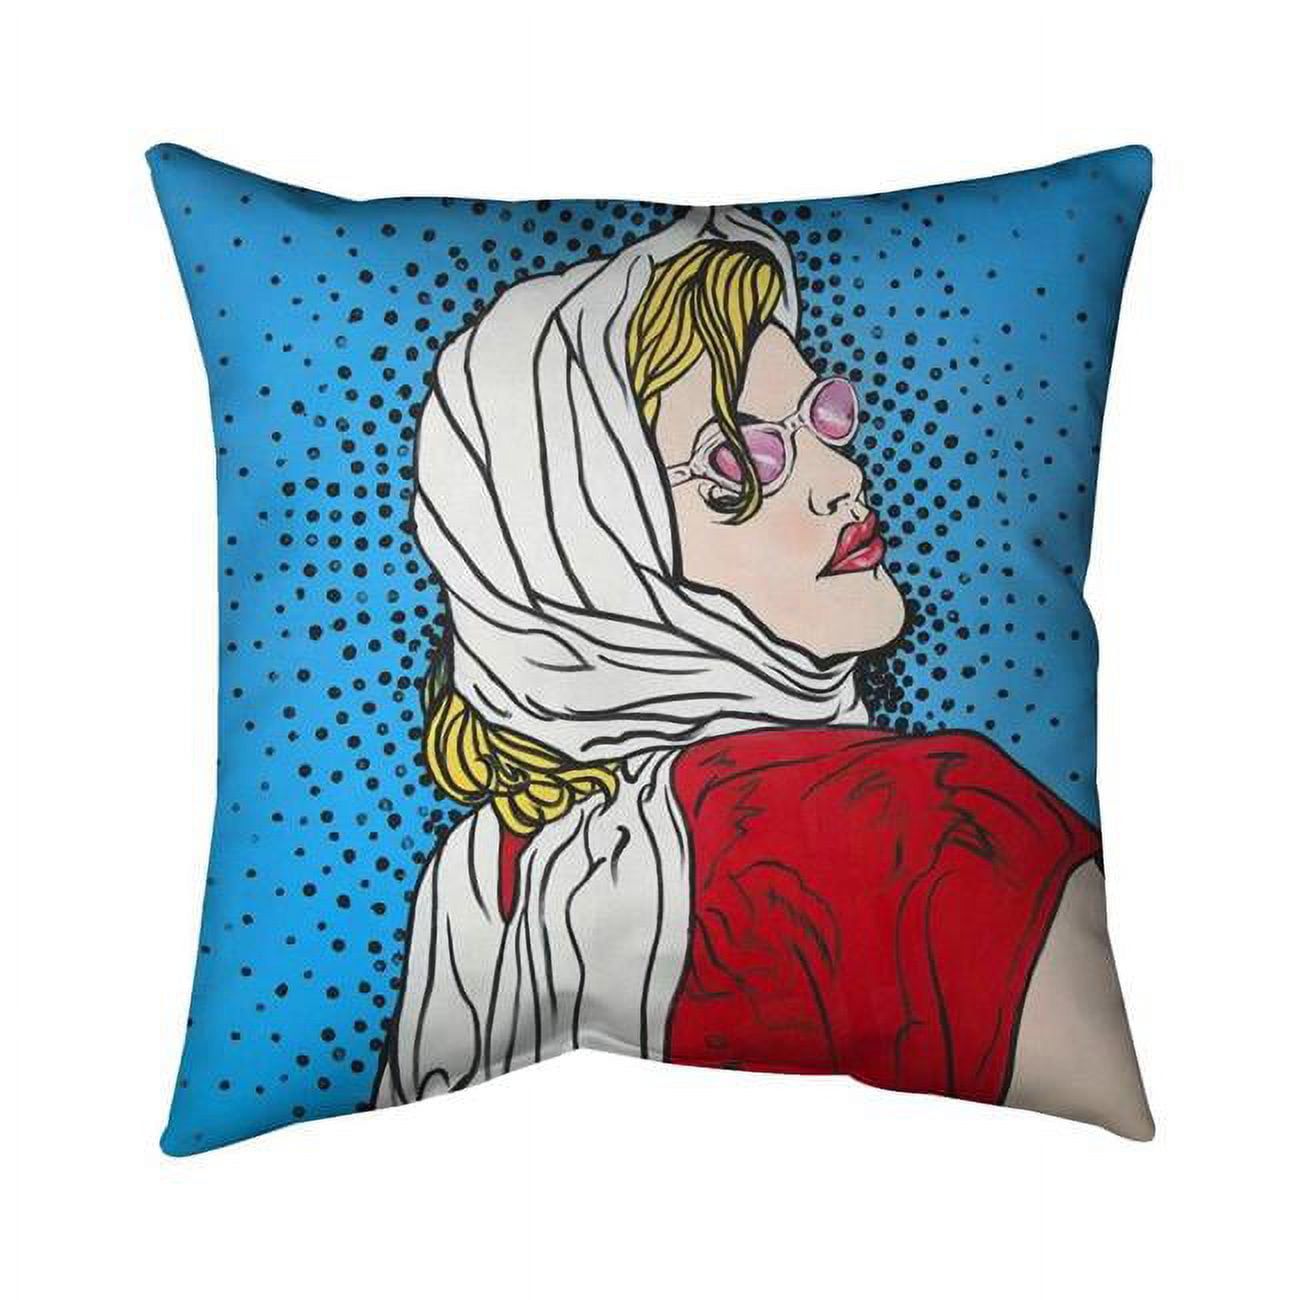 Begin Home Decor 5542-1616-PO1 16 x 16 in. Pop Art Woman-Double Sided Print Outdoor Pillow Cover